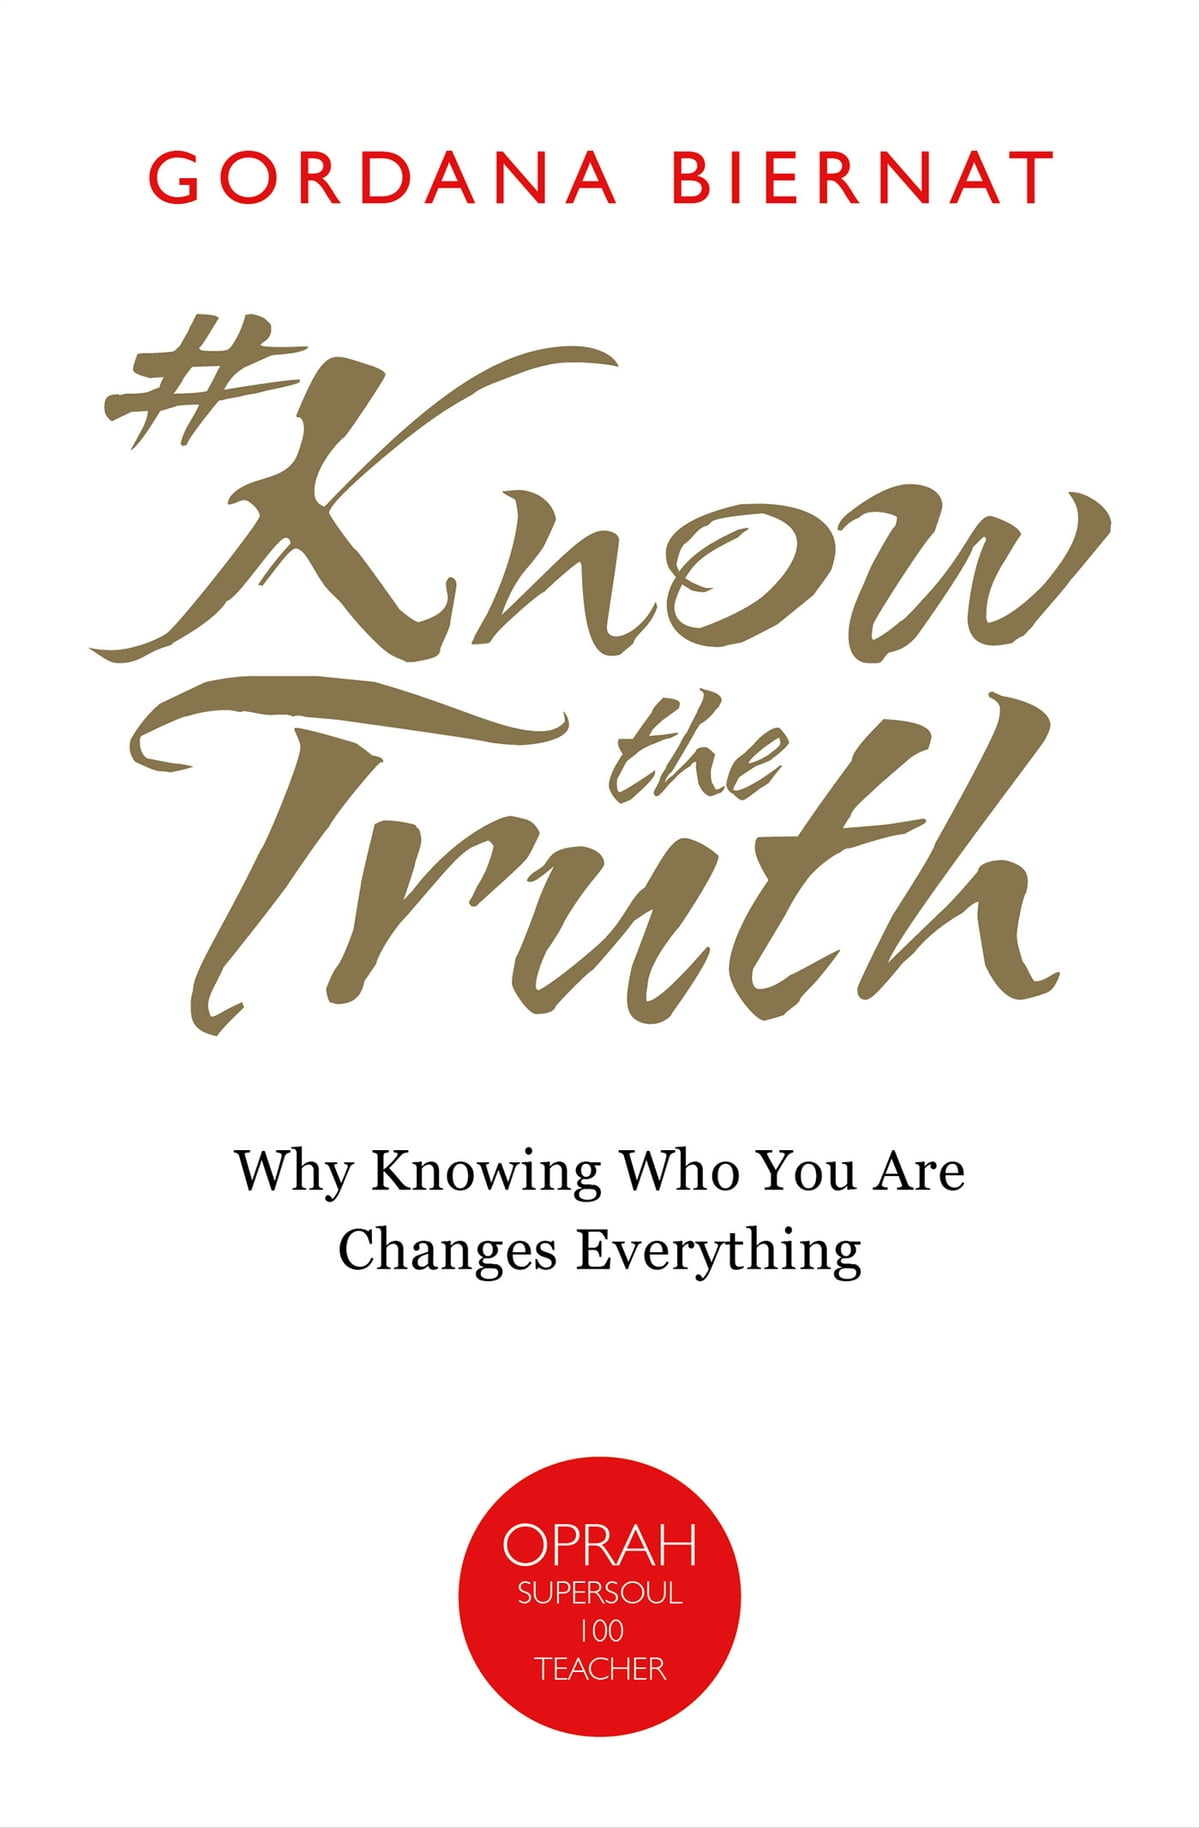 The book cover for #KnowTheTruth.